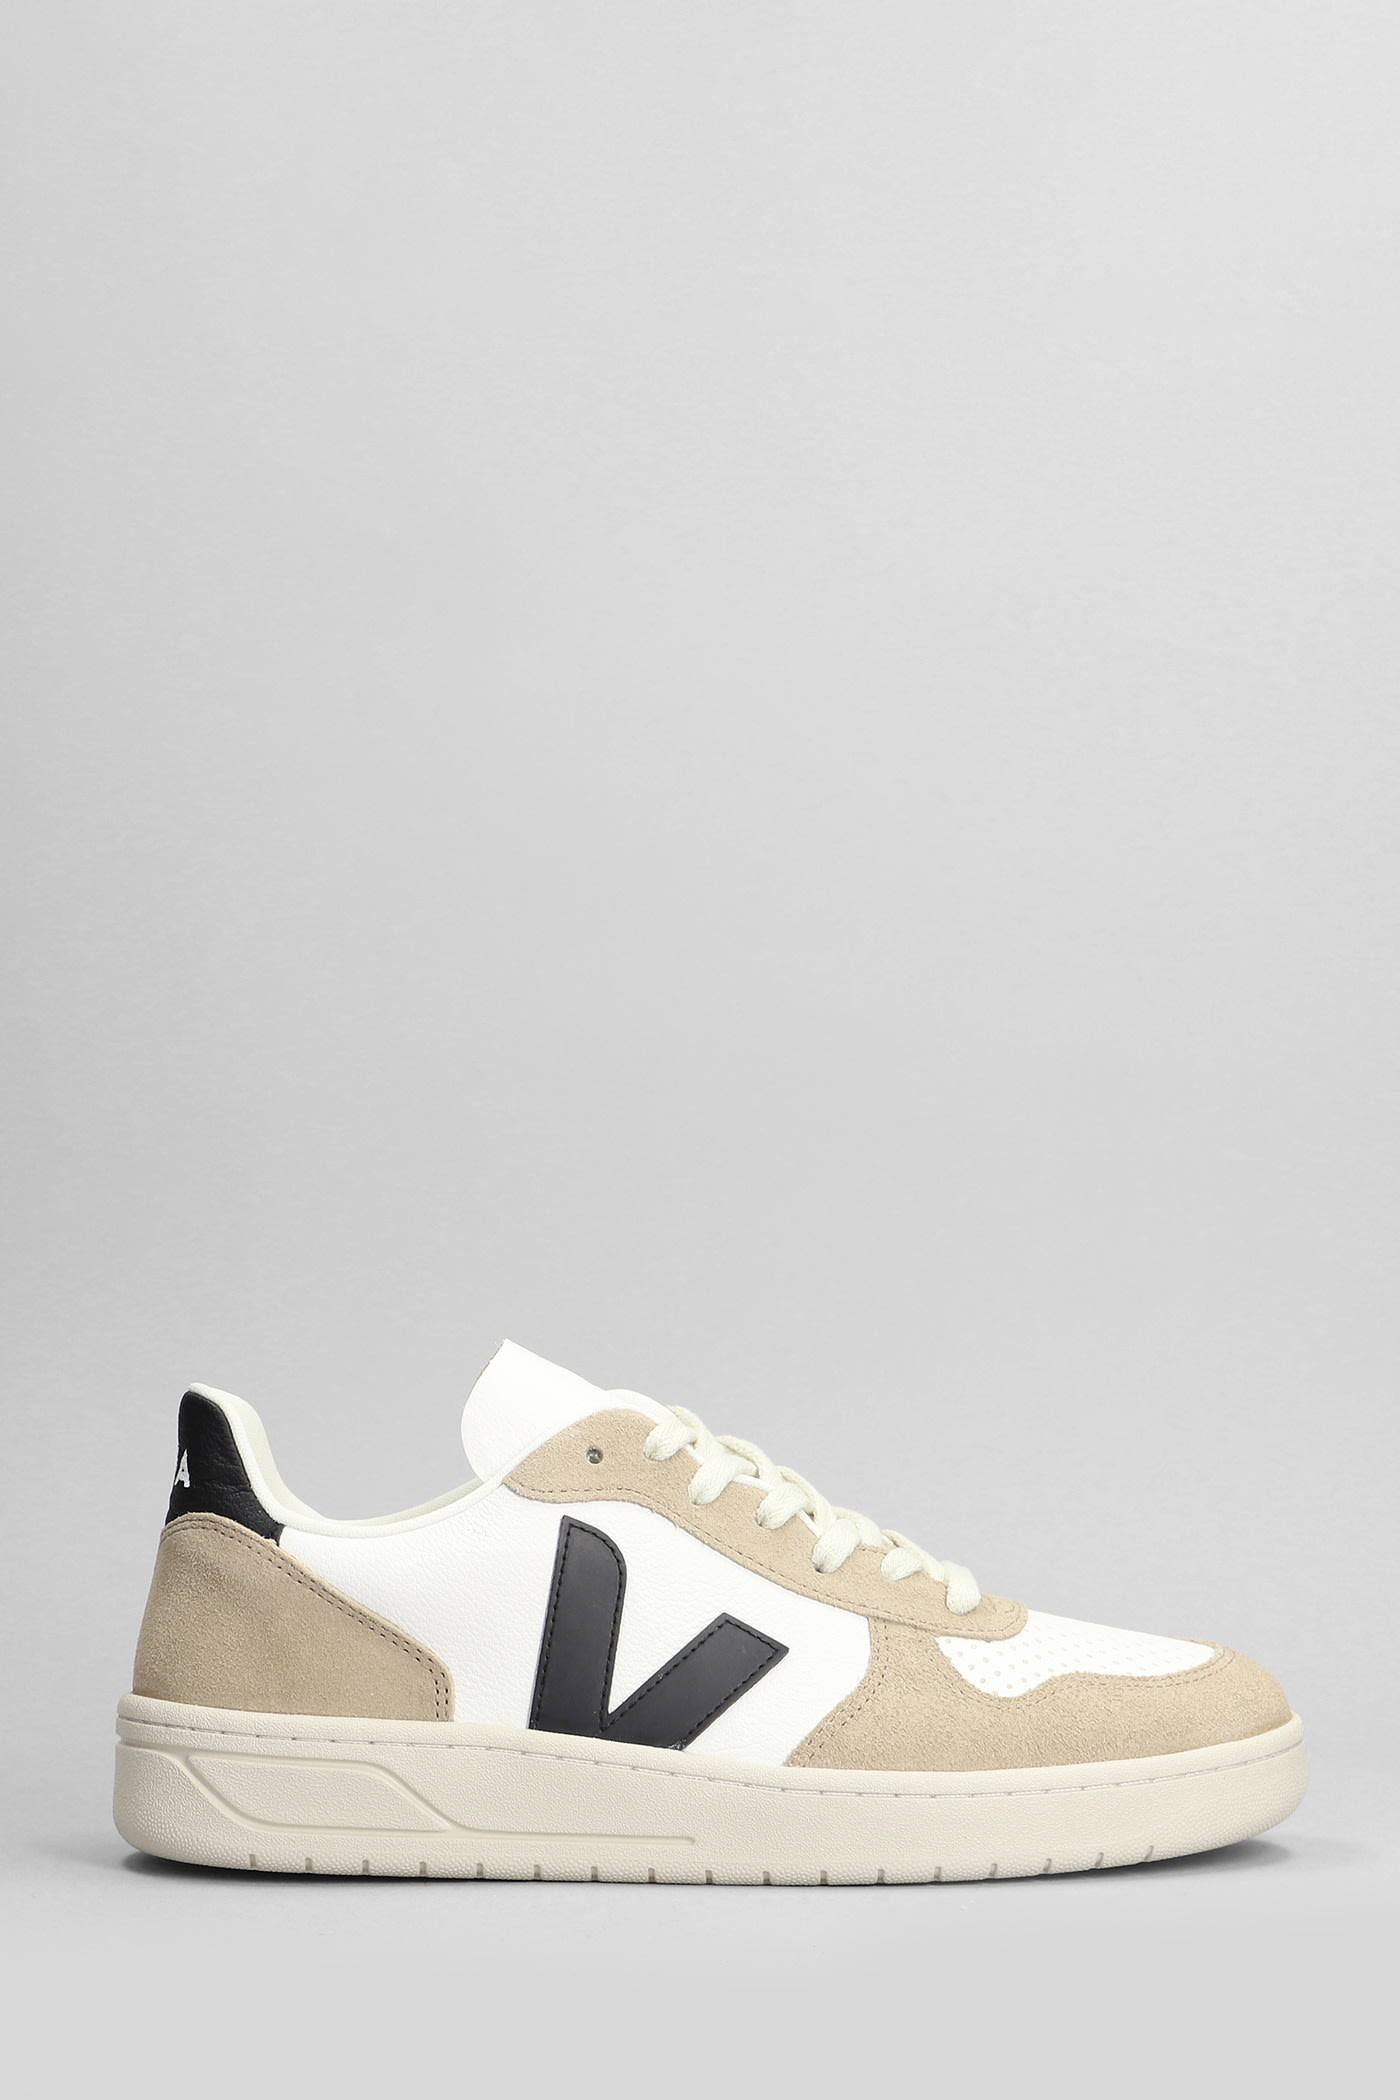 V-10 Sneakers In White Suede And Leather